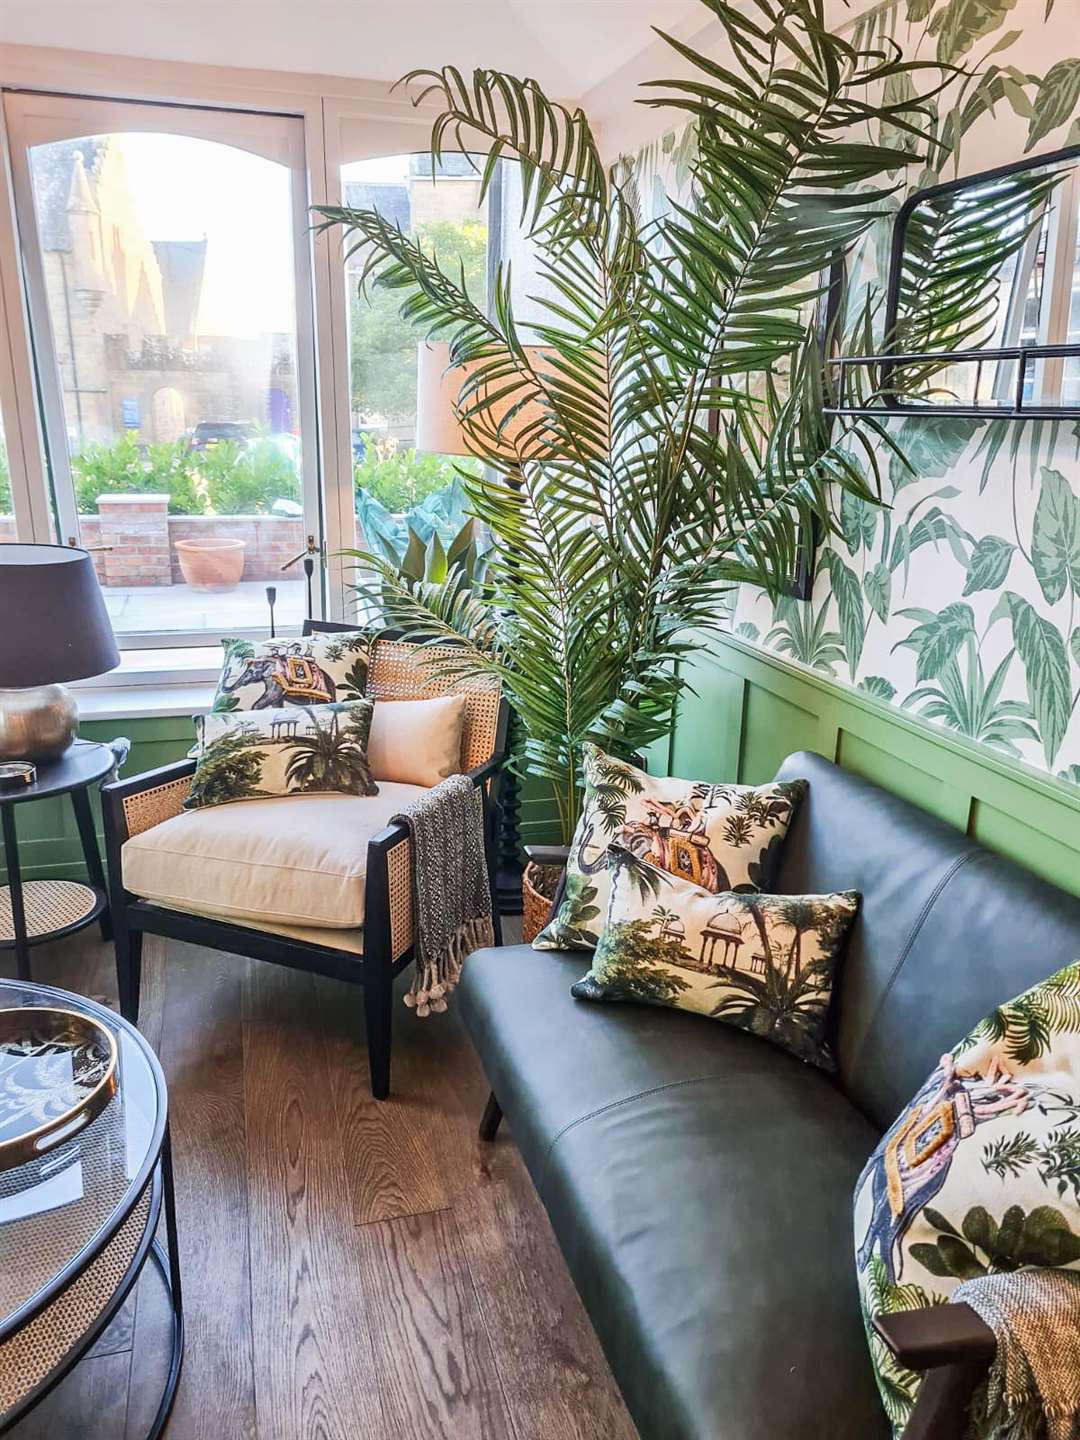 The conservatory overlooks the rear of the property with its formerly laid garden and terrace, complete with outdoor furniture for enjoying the long summer days right in the heart of town.